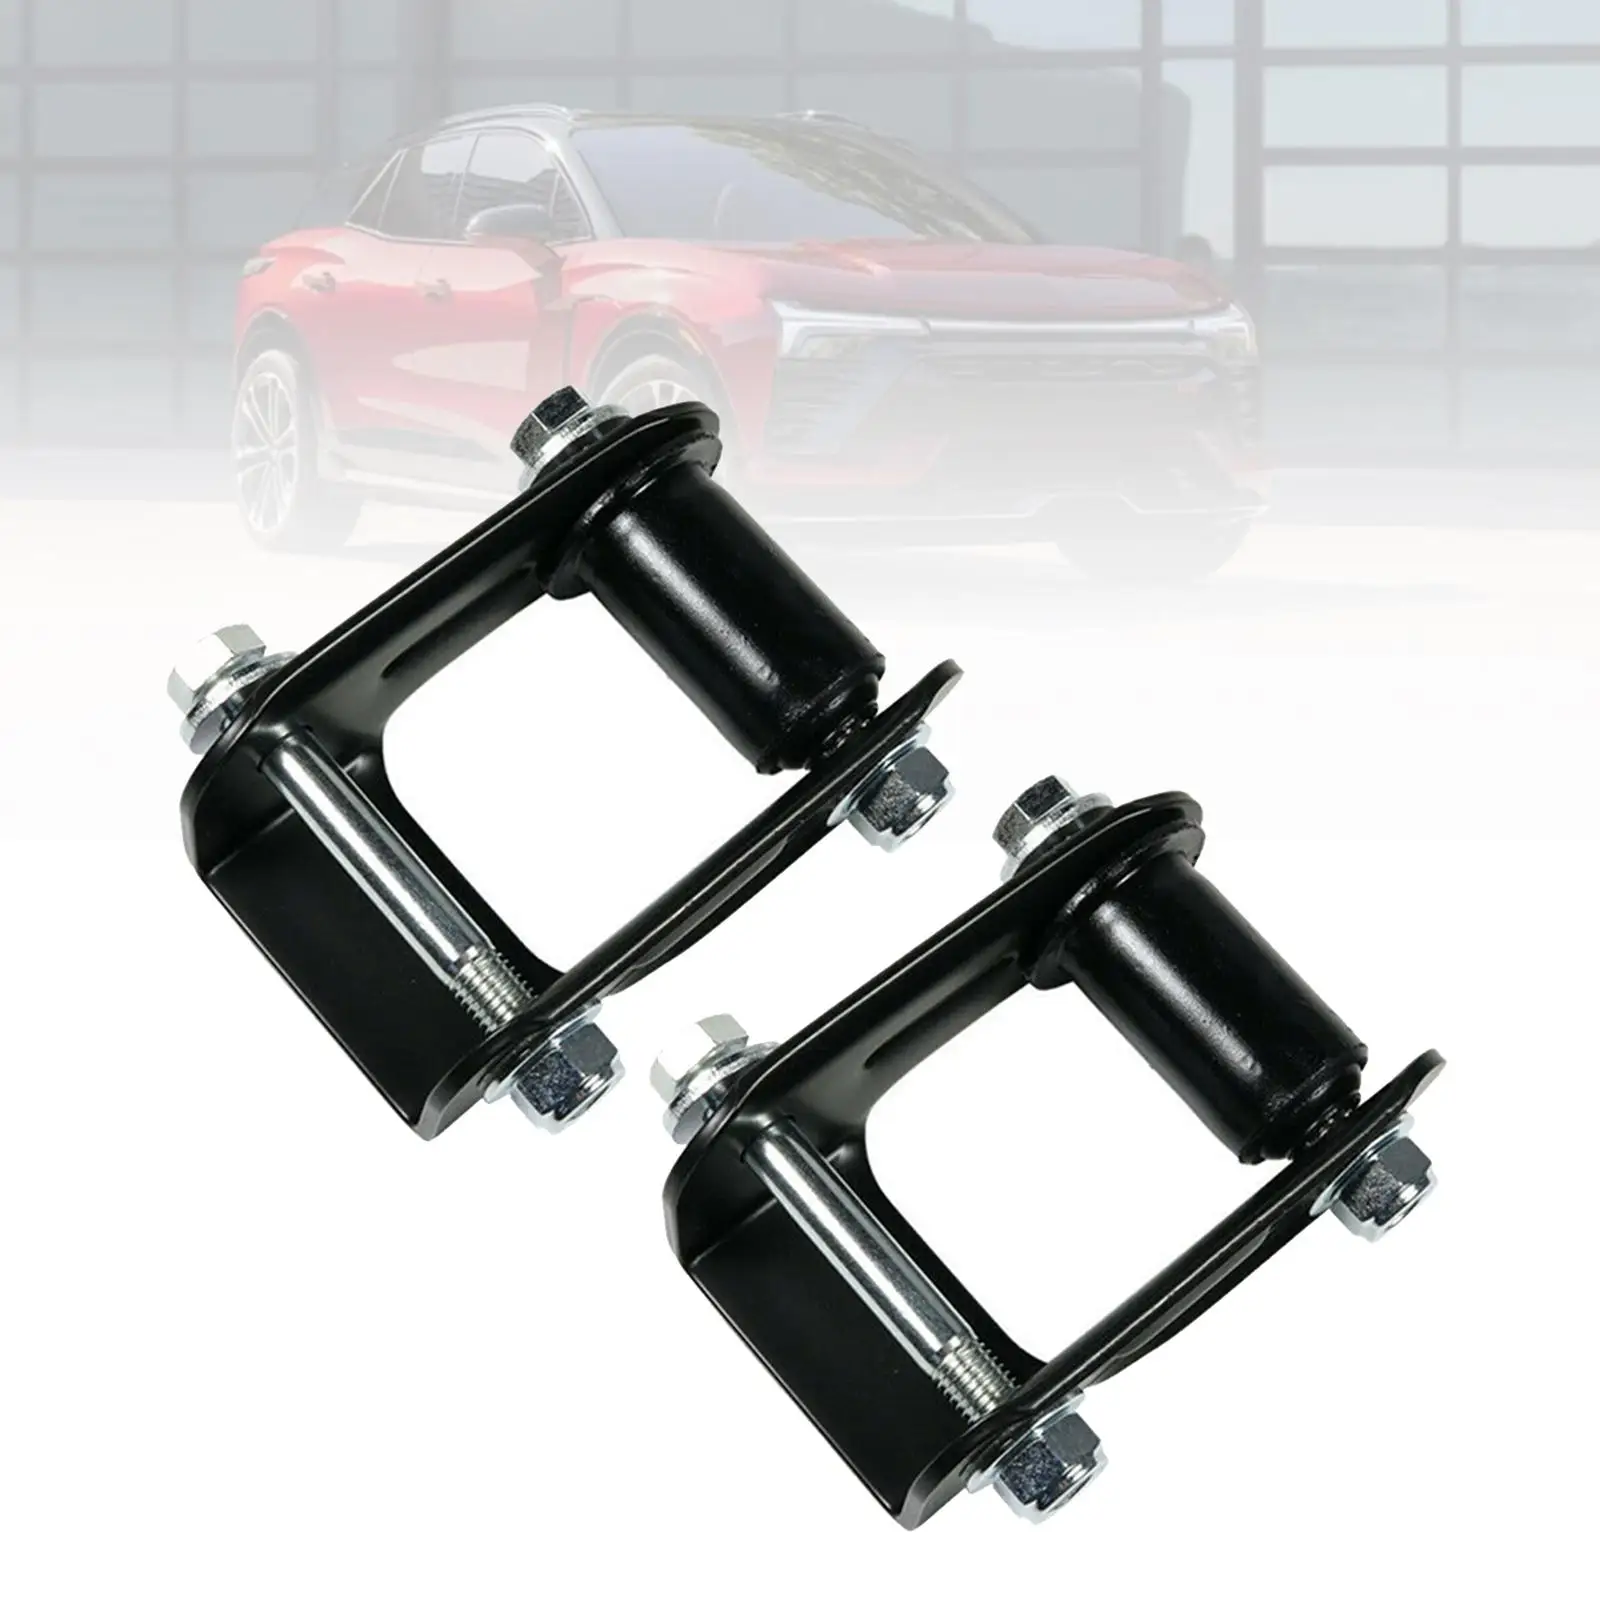 2x Rear Leaf Spring Shackle Kit Replaces Fine Surface Processing Long Service